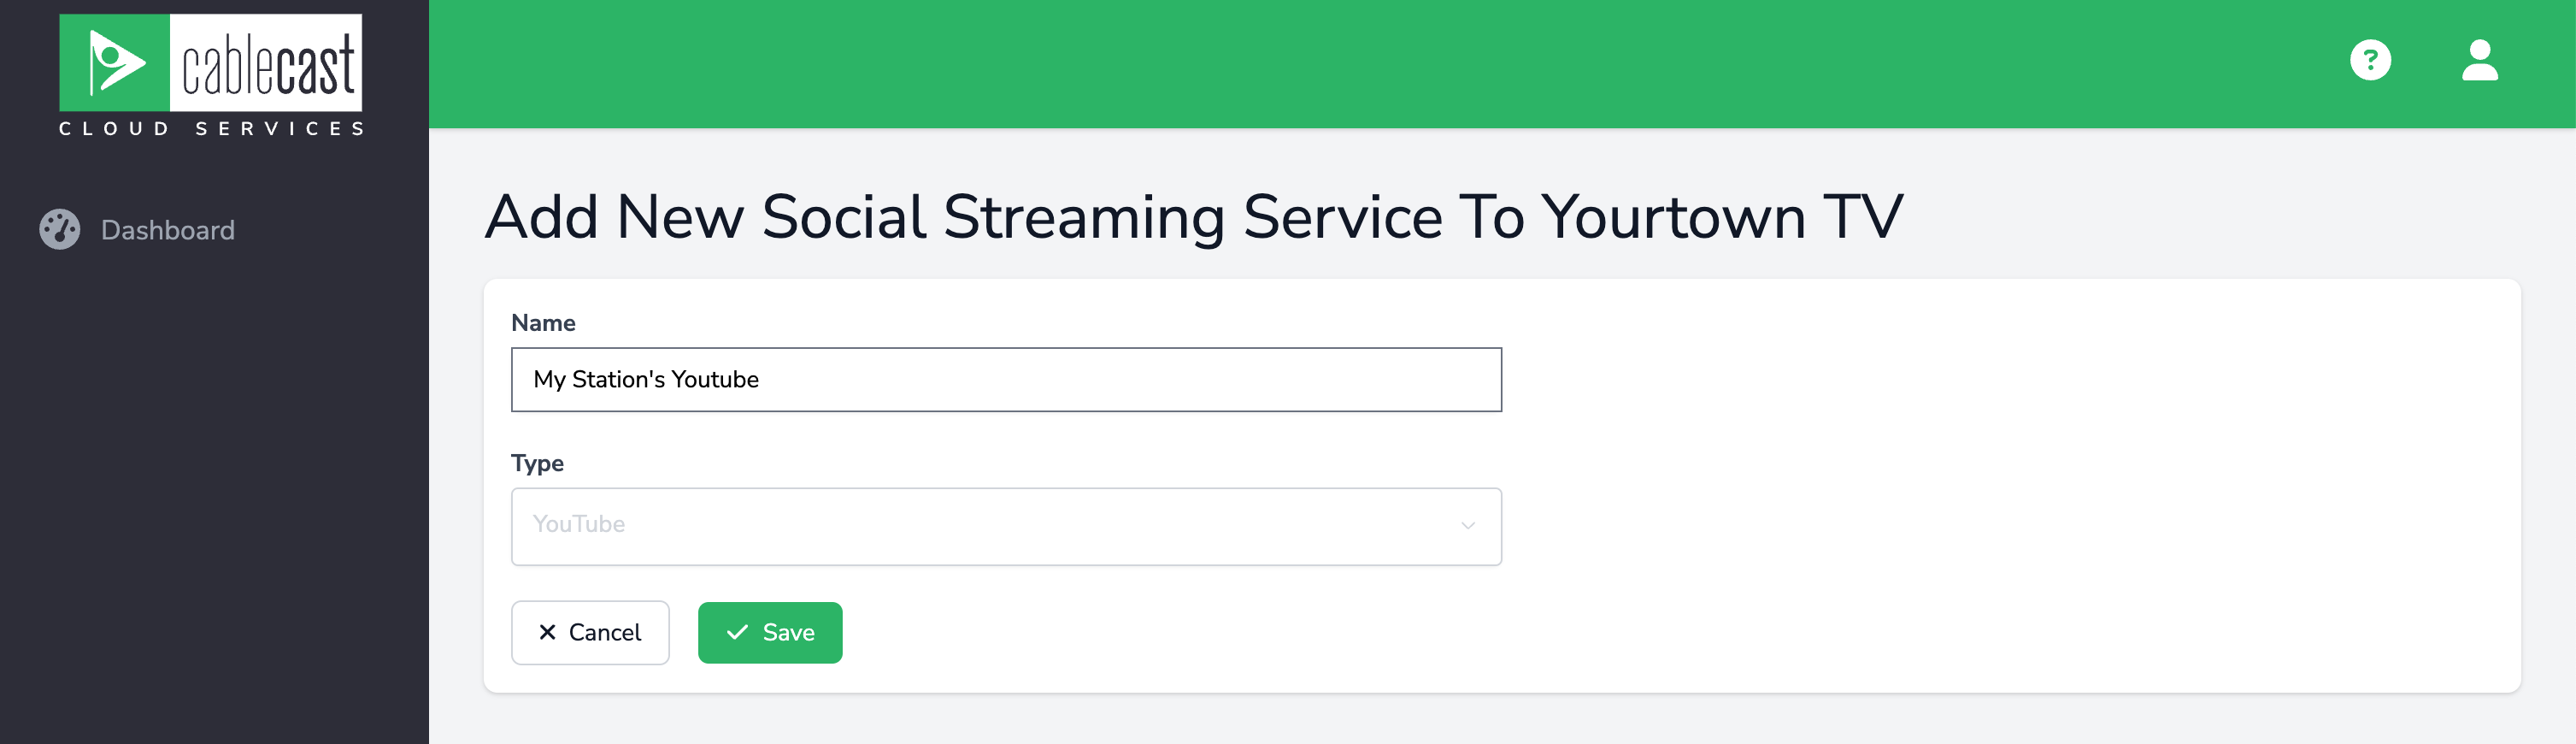 Adding a new Social Streaming Service.